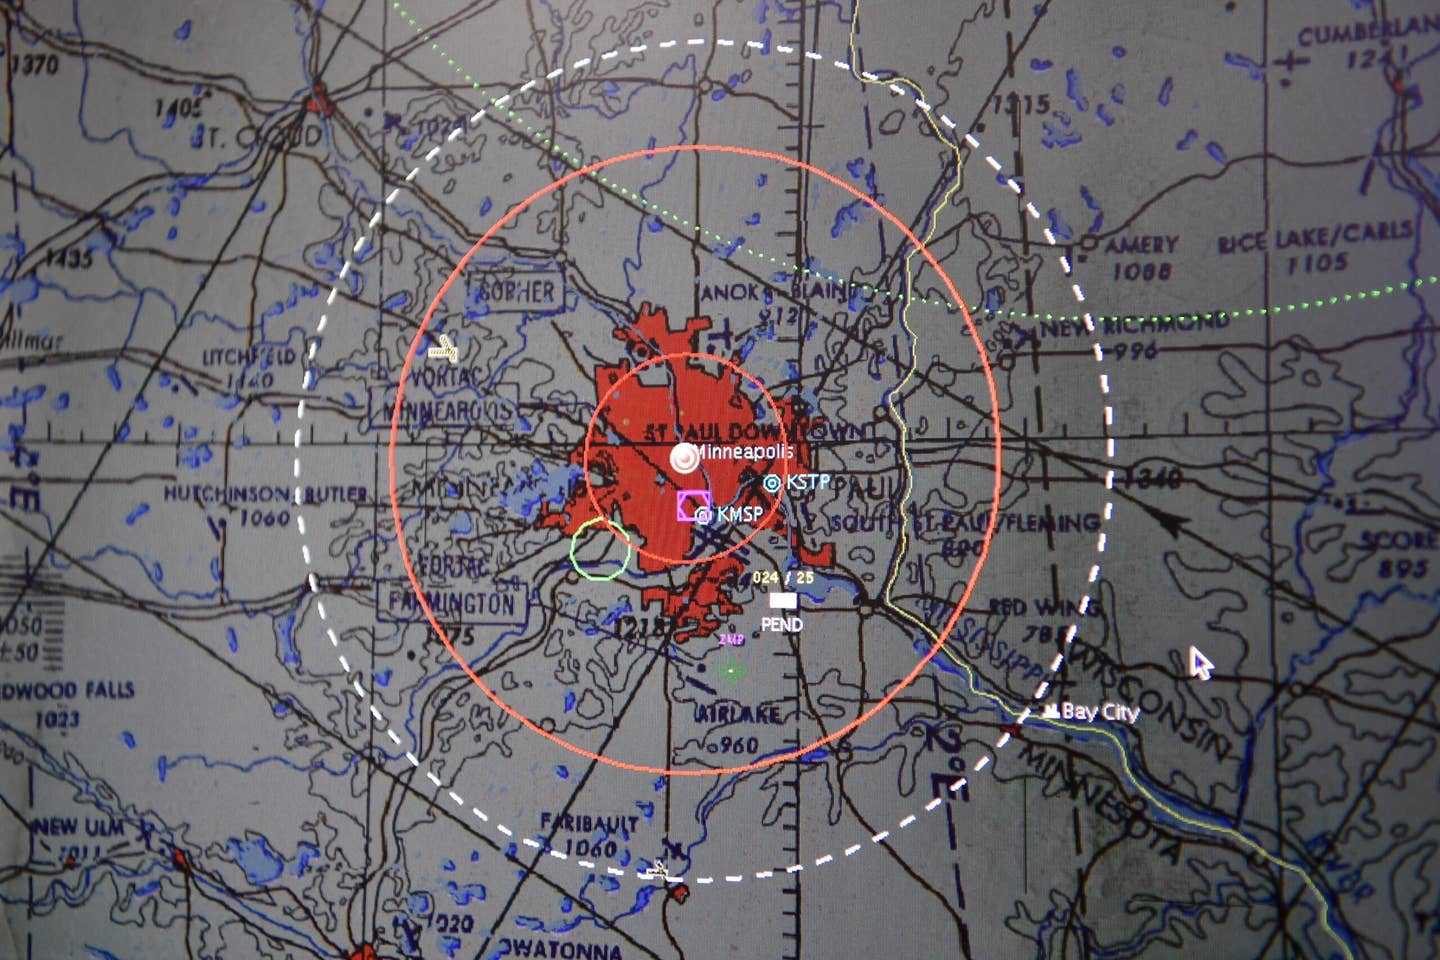 The Western Air Defense Sector’s Battle Control System-Fixed illustrates the Federal Aviation Administration’s temporary 30-mile radius flight restricted area around U.S. Bank Stadium for Super Bowl LII in Minneapolis. The BCS-F is a modern real-time battle management command and control system. Fielded at the North American Aerospace Defense Command's Air Defense Sectors, BCS-F provides NORAD commanders with a highly interoperable and reliable platform in support of the nation's homeland defense air mission. (U.S. Air National Guard photo by Kimberly D. Burke)